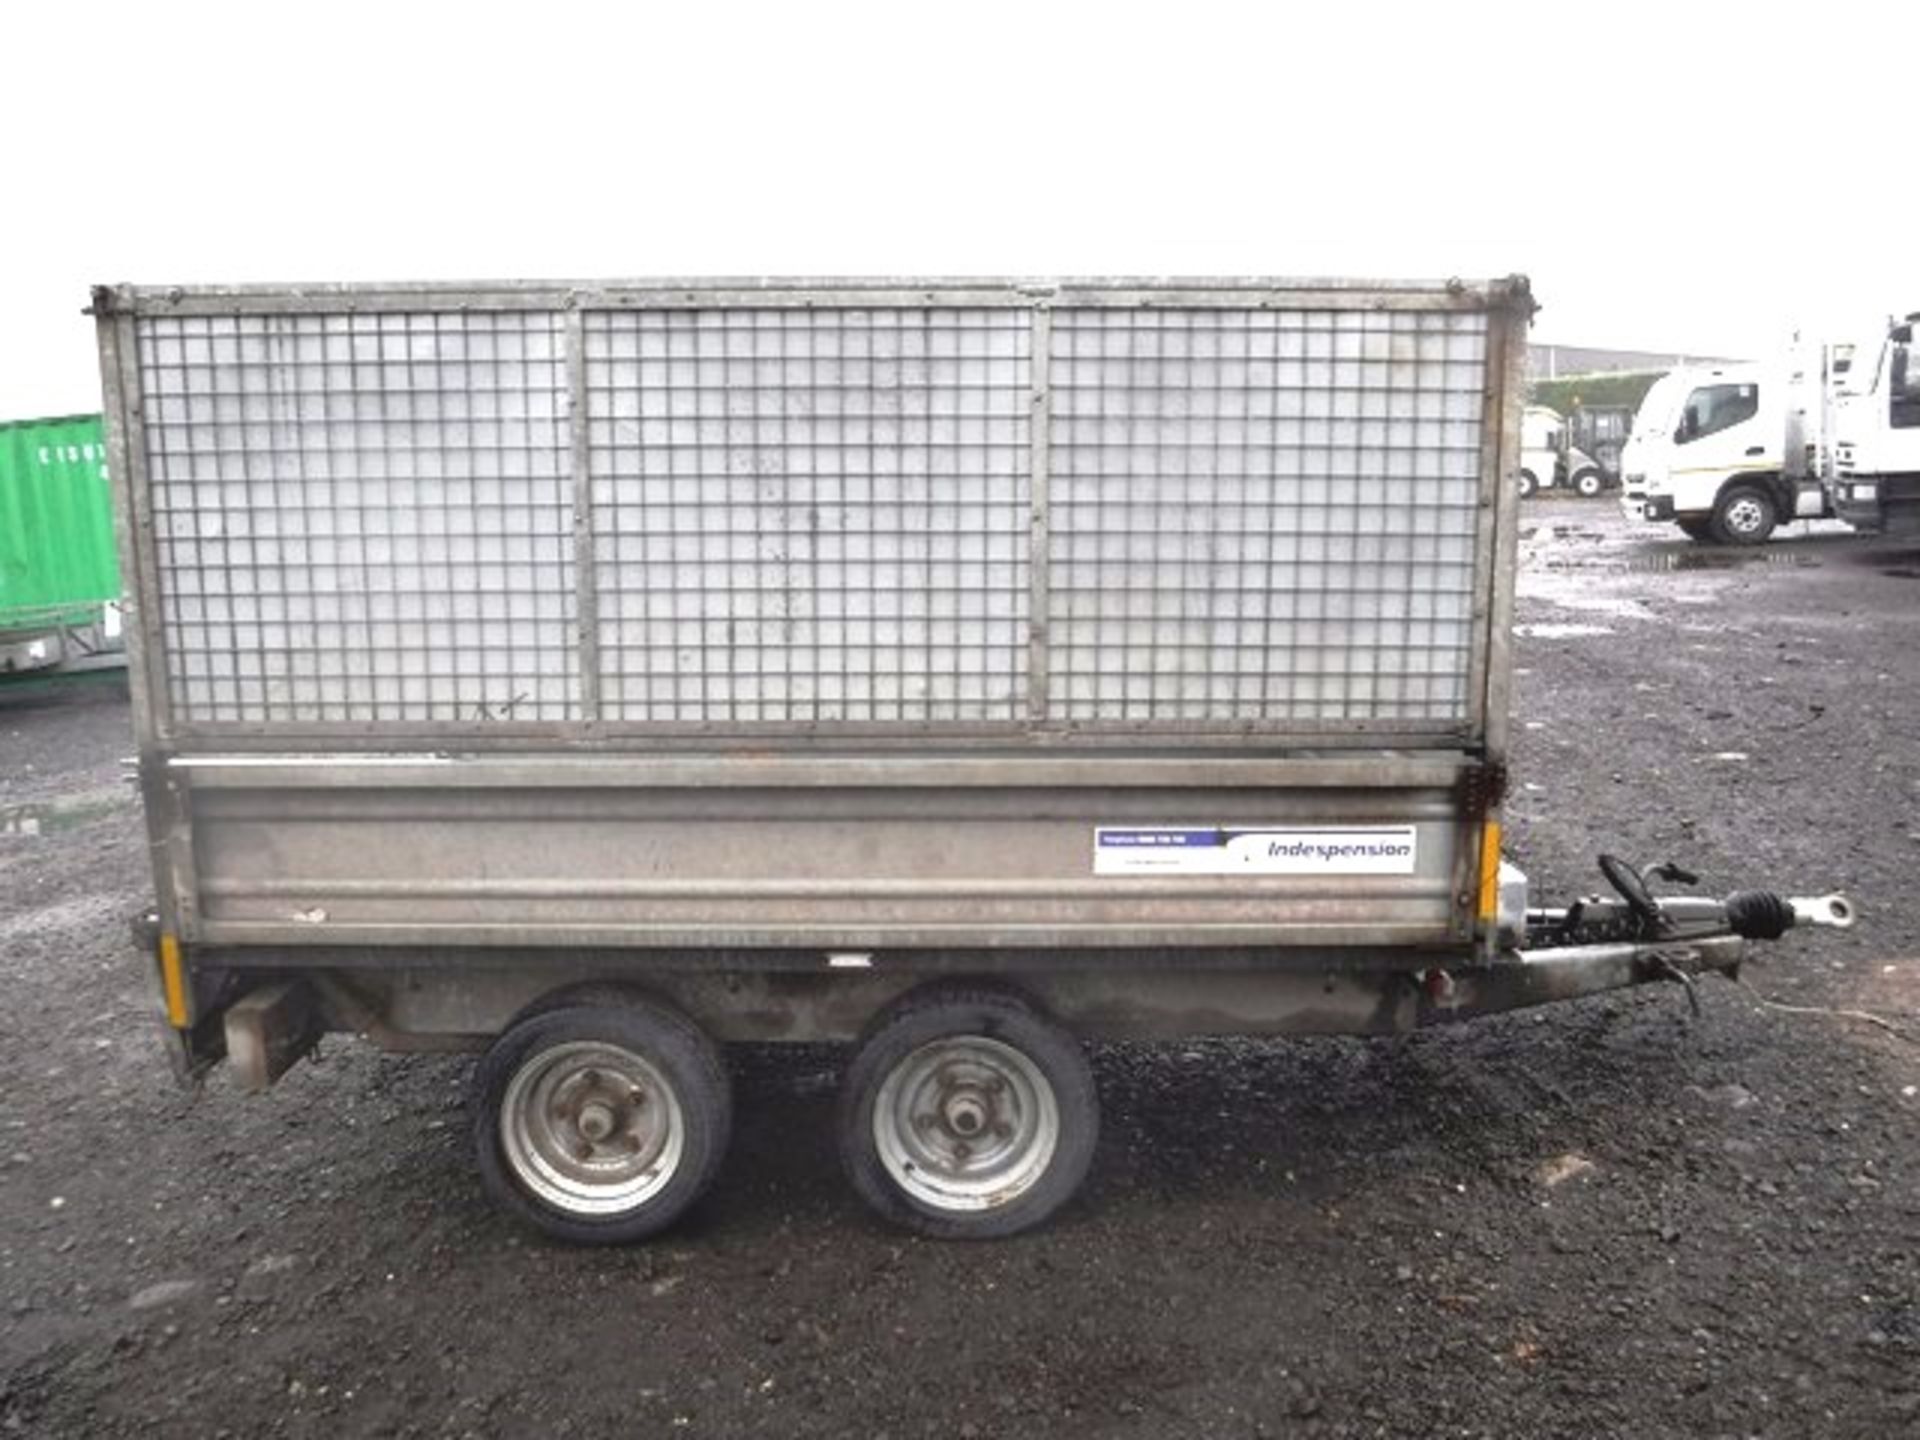 INDESPENSION twin axle tipping trailer with control. 8ft x 5.5ft. Asset - 758-7034 - Image 8 of 13